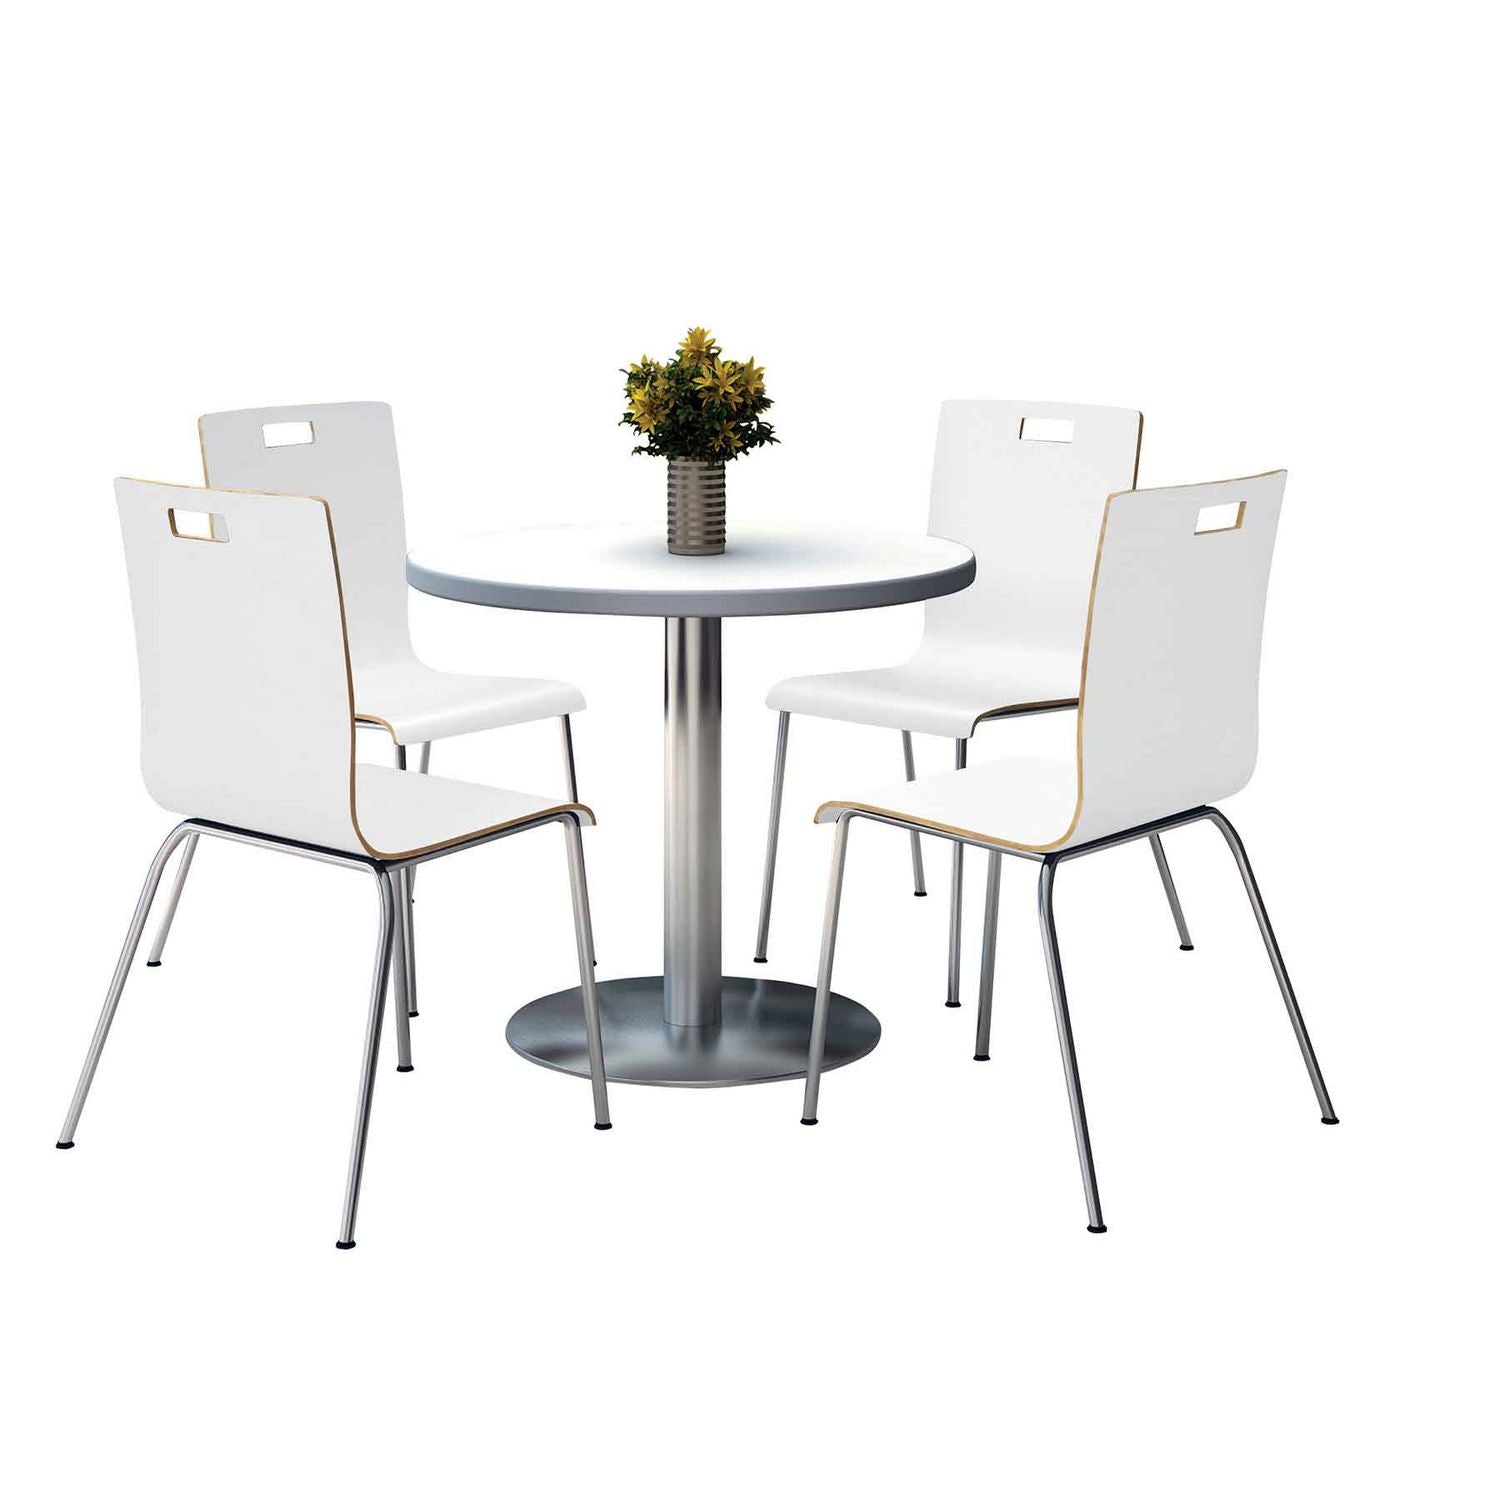 pedestal-table-with-four-white-jive-series-chairs-round-36-dia-x-29h-crisp-linen-ships-in-4-6-business-days_kfi810389024968 - 1